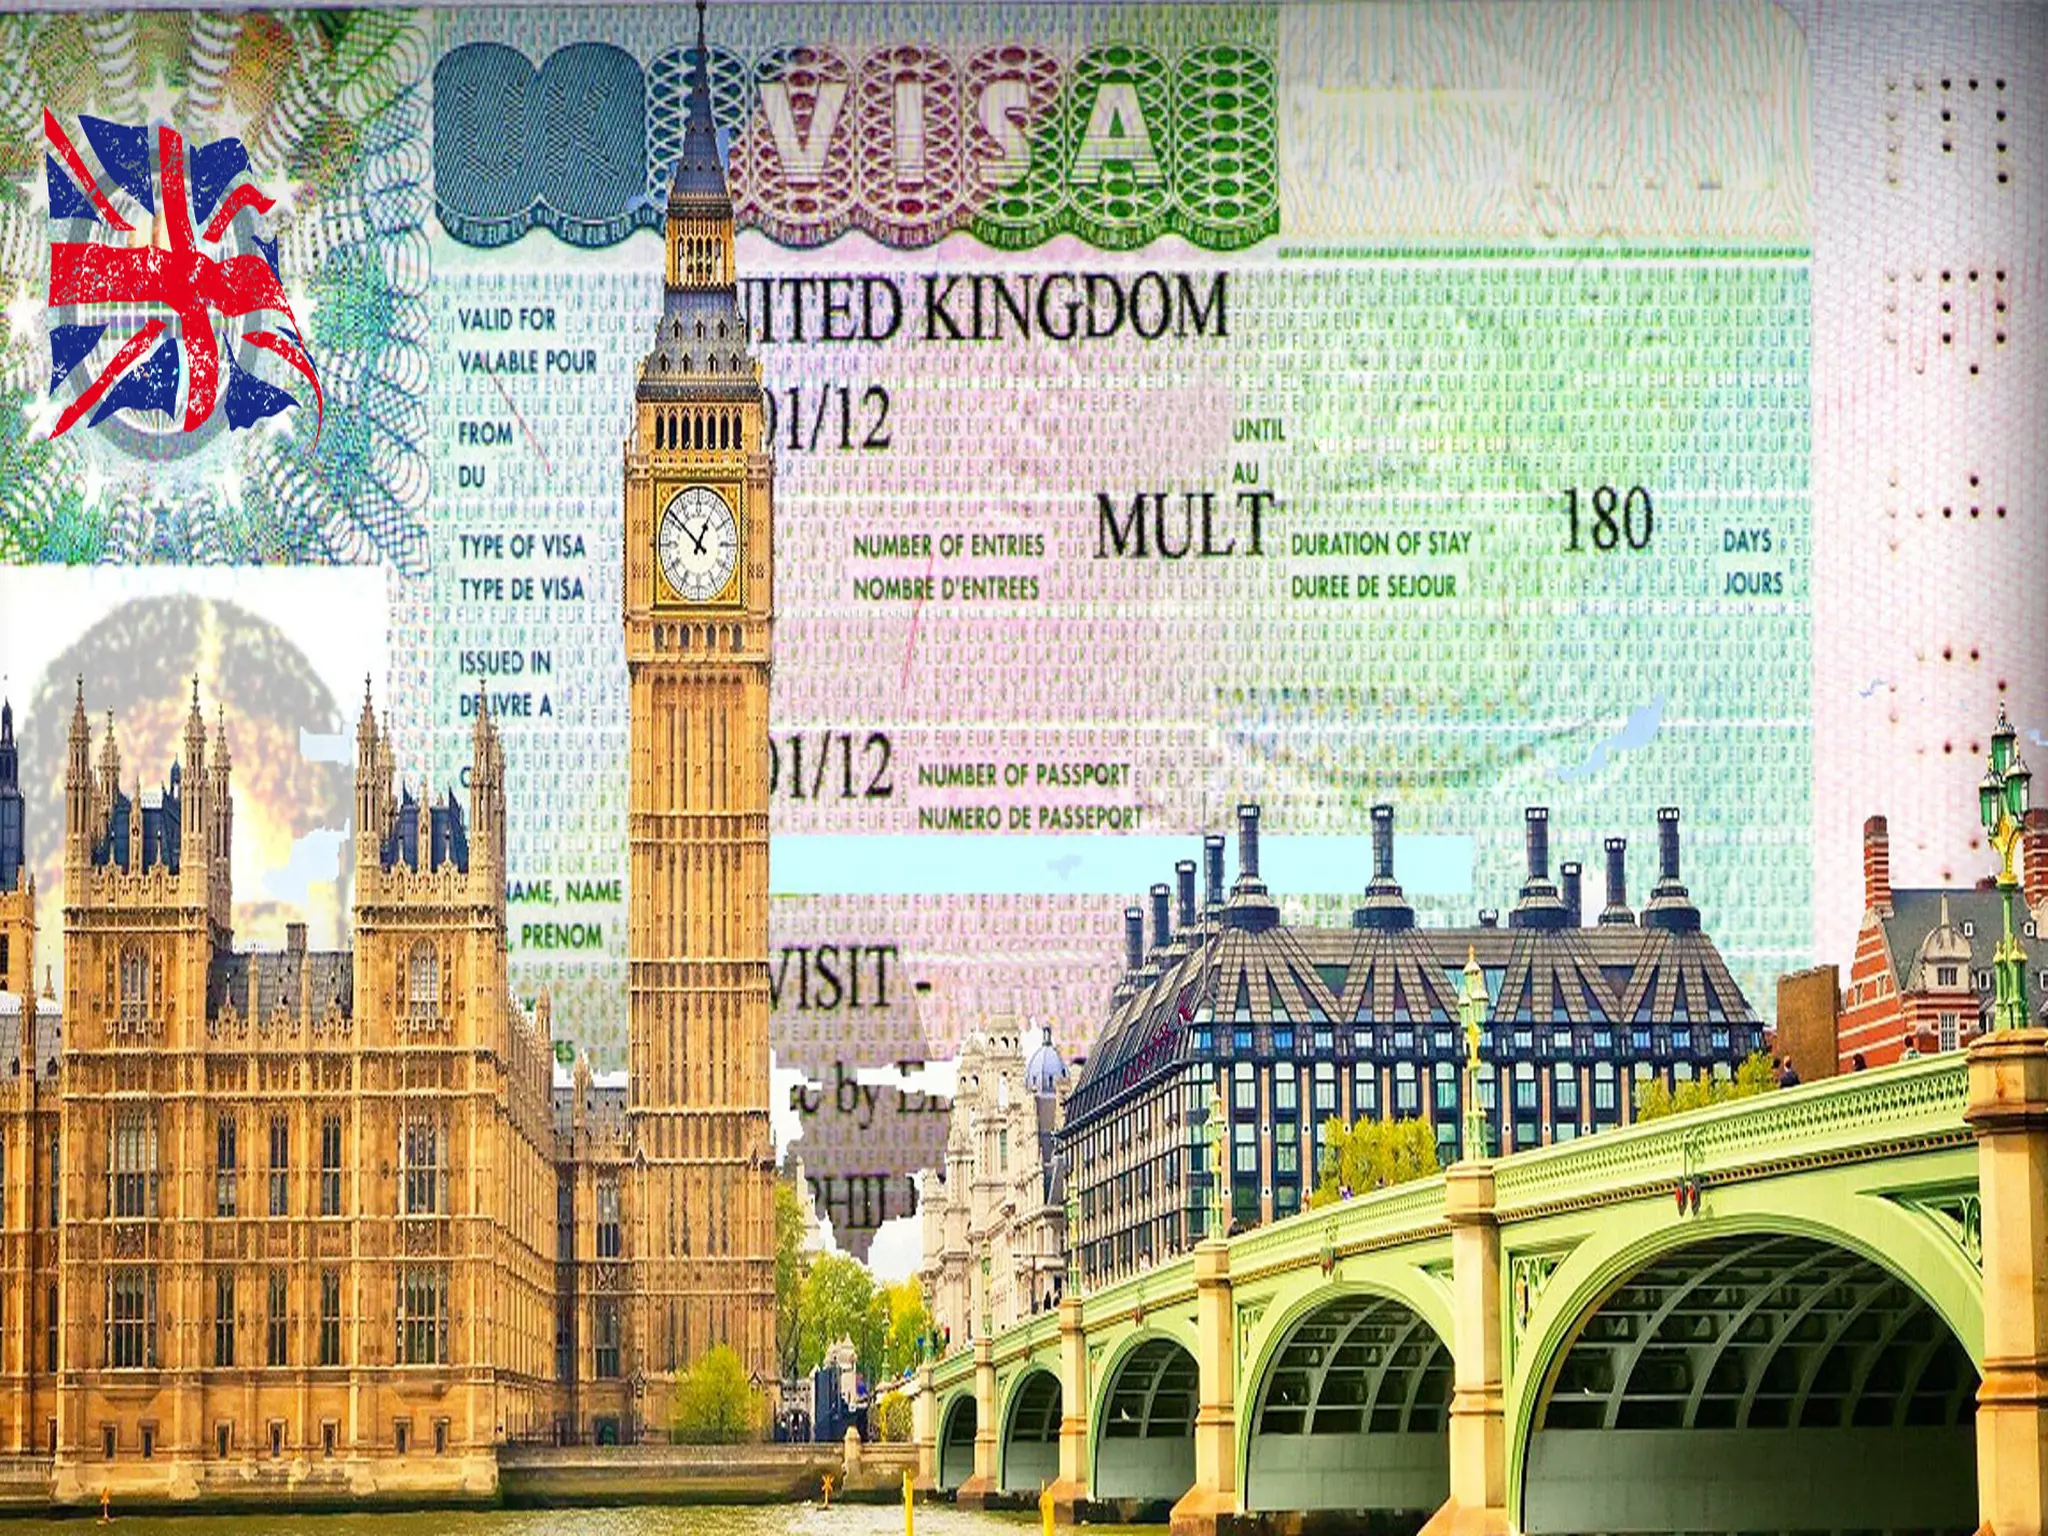 Britain implements Multiple Entry Visa Rules next month for these countries